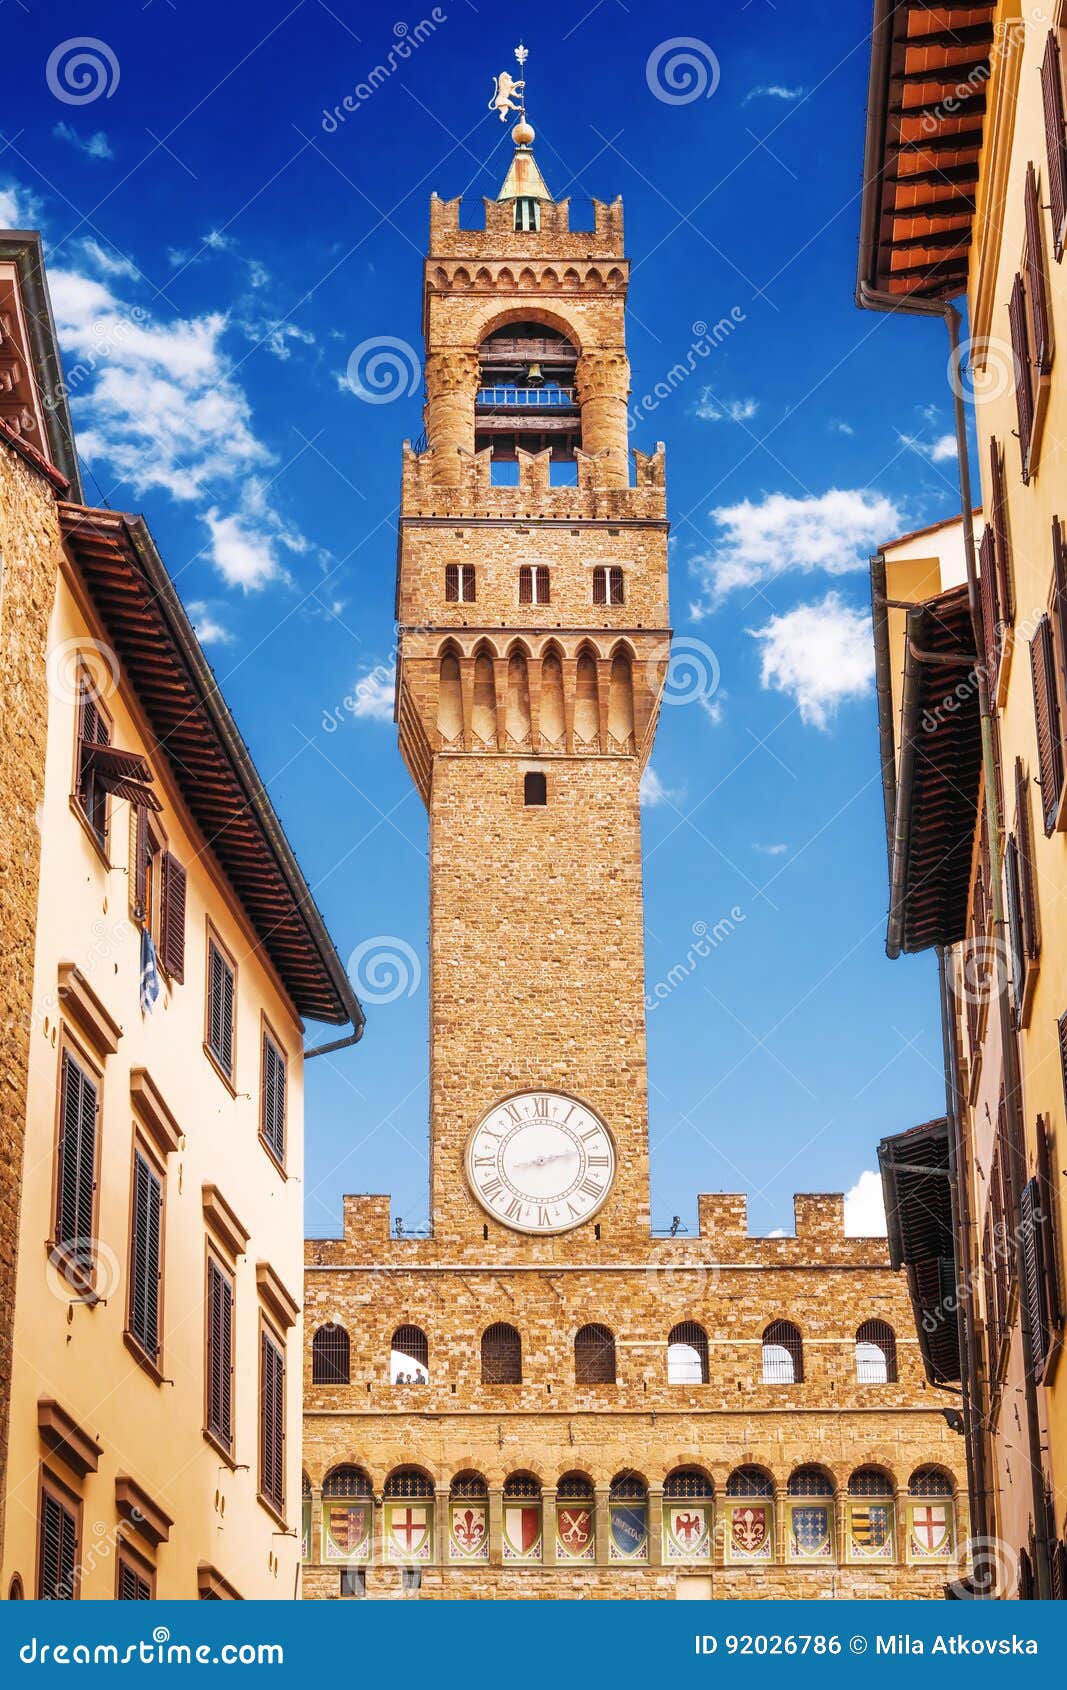 arnolfo`s tower, part of palazzo vecchio the old palace on piazza della signoria, florence